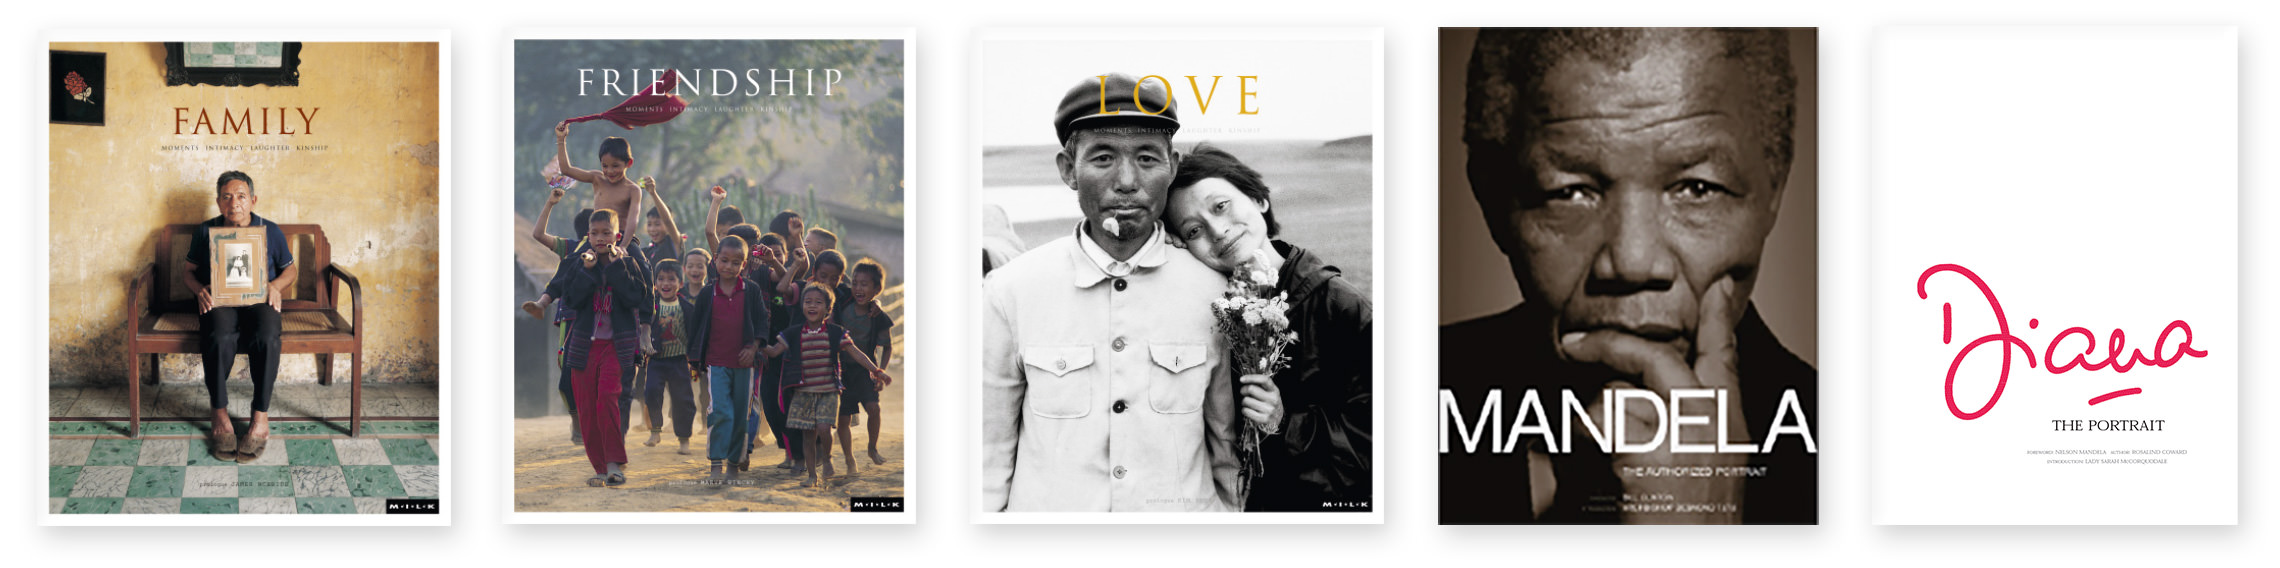 Row of covers with titles: Family, Friendship, Love, Mandela and Diana The Portrait books